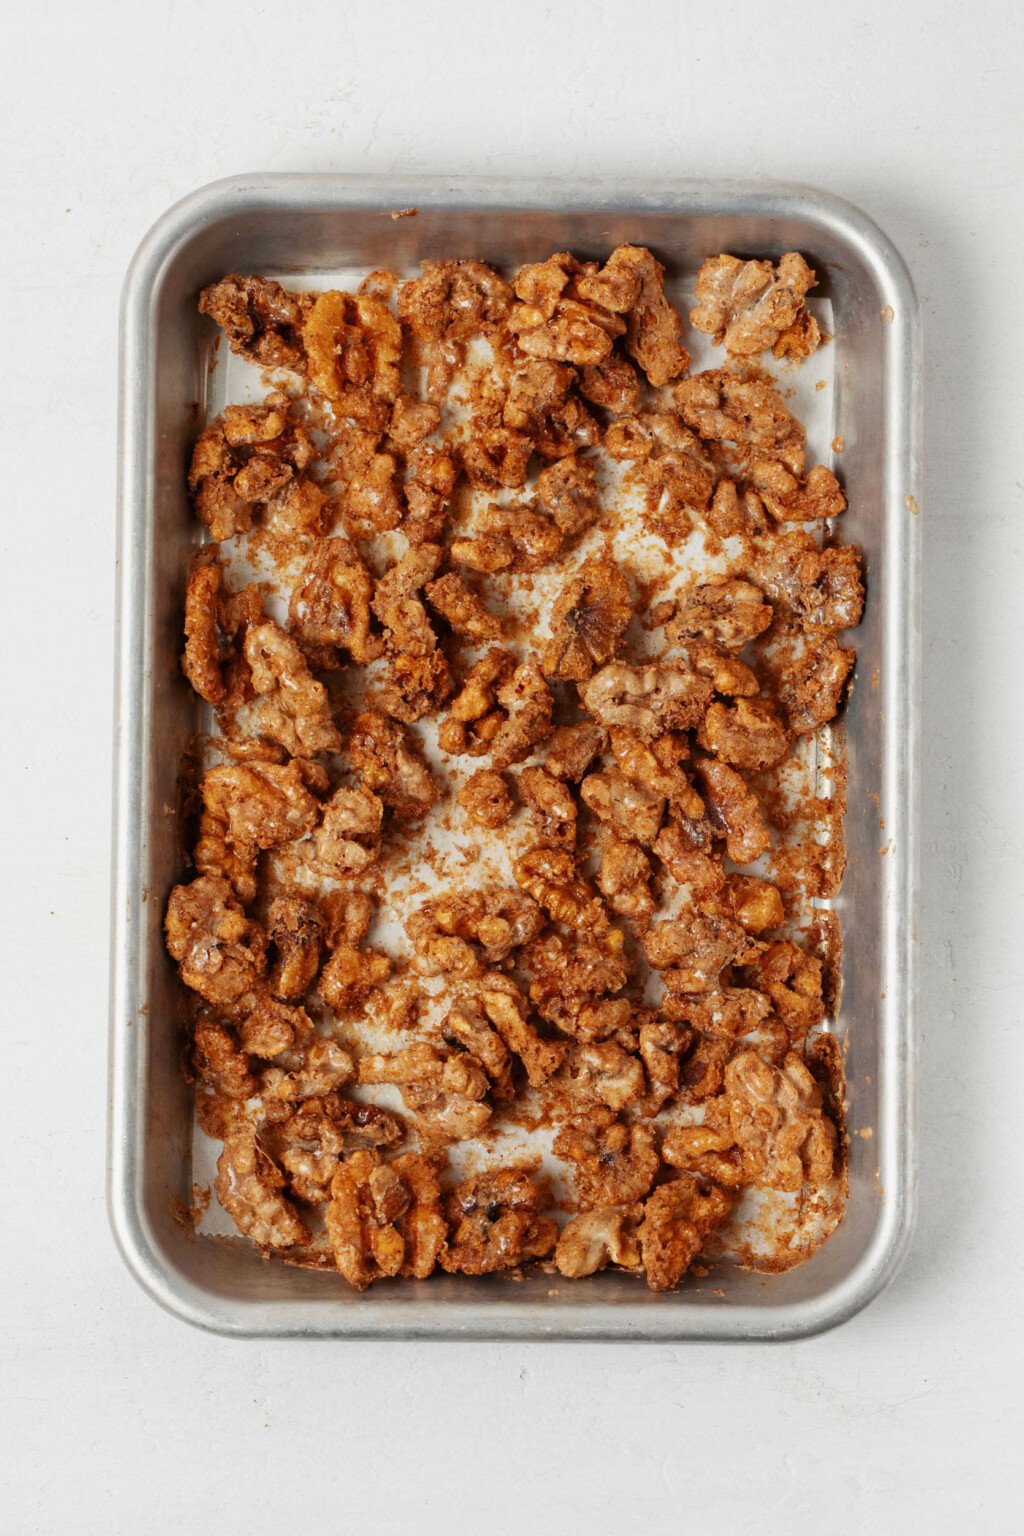 Vegan candied walnuts have just been baked and are cooling on a baking sheet.